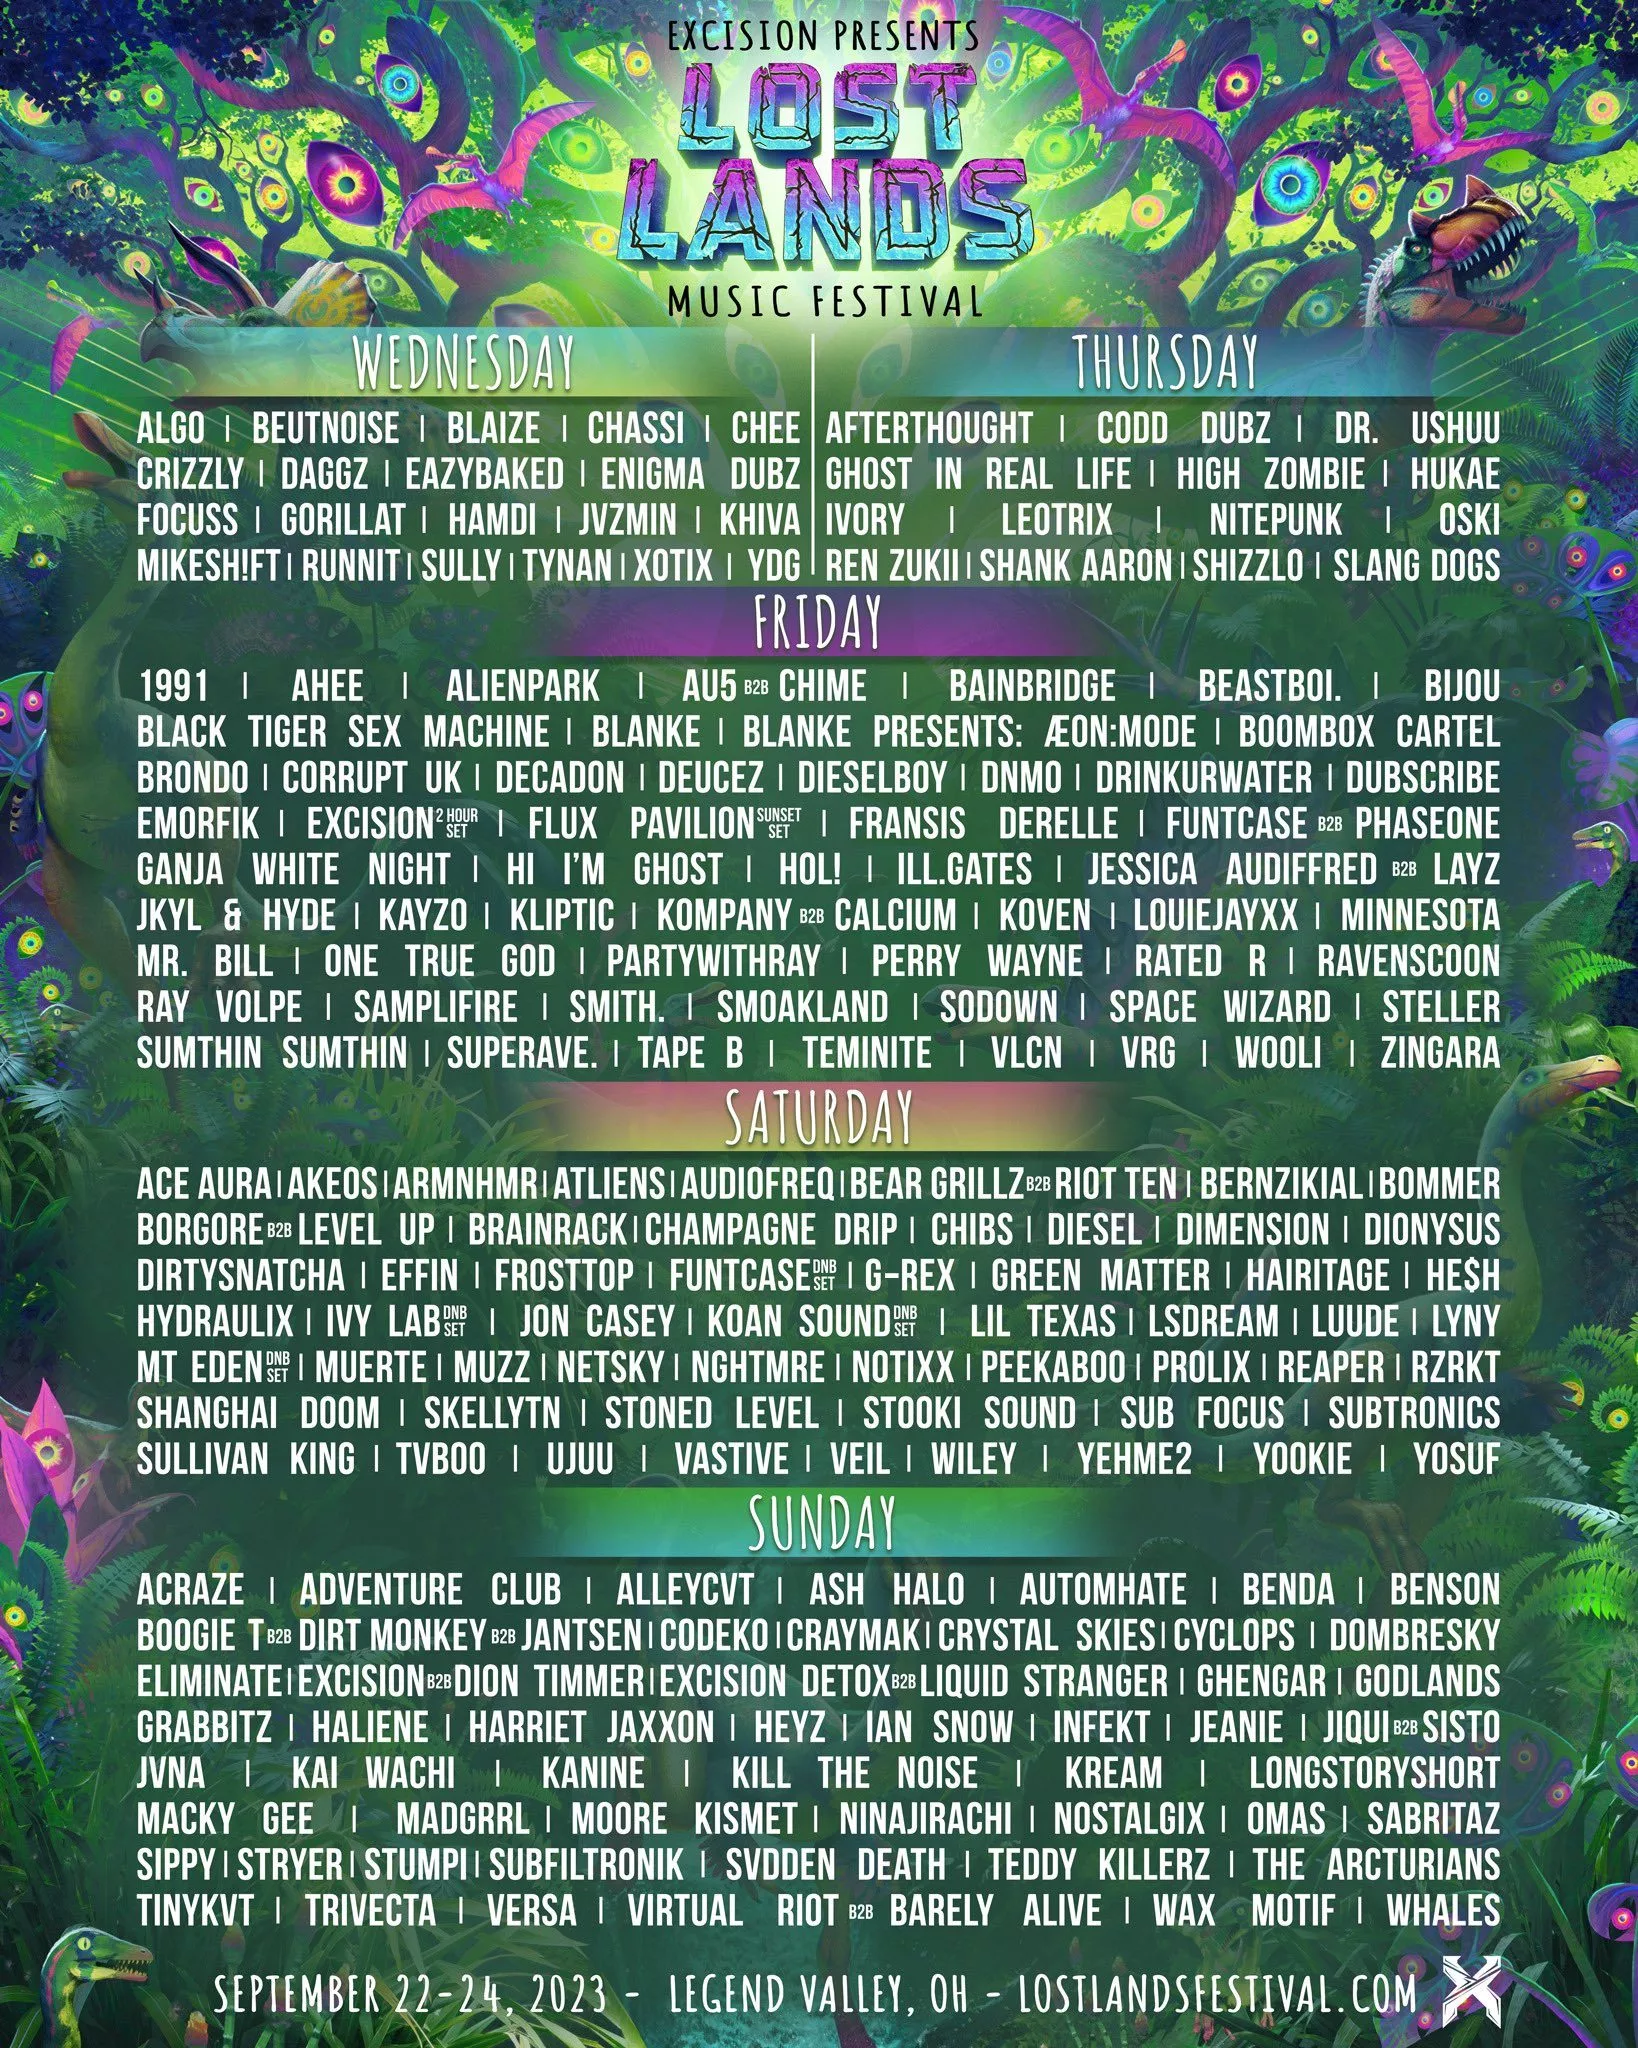 Lost Lands Drops Daily Lineups From Wednesday to Sunday AllTime EDM